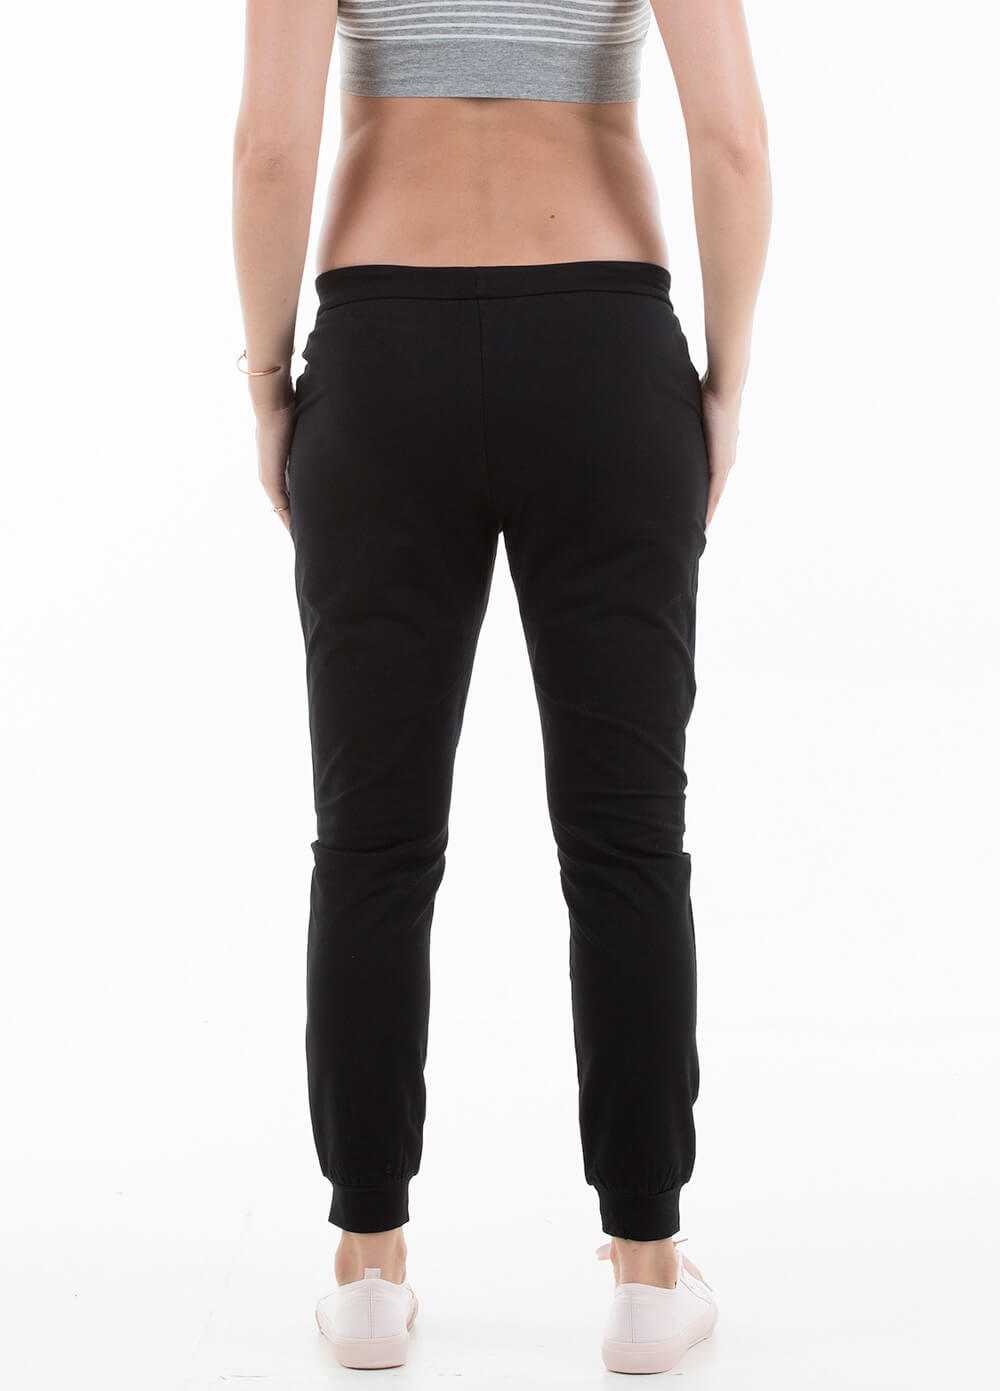 Myles Maternity Jogger Pants in Black by Trimester